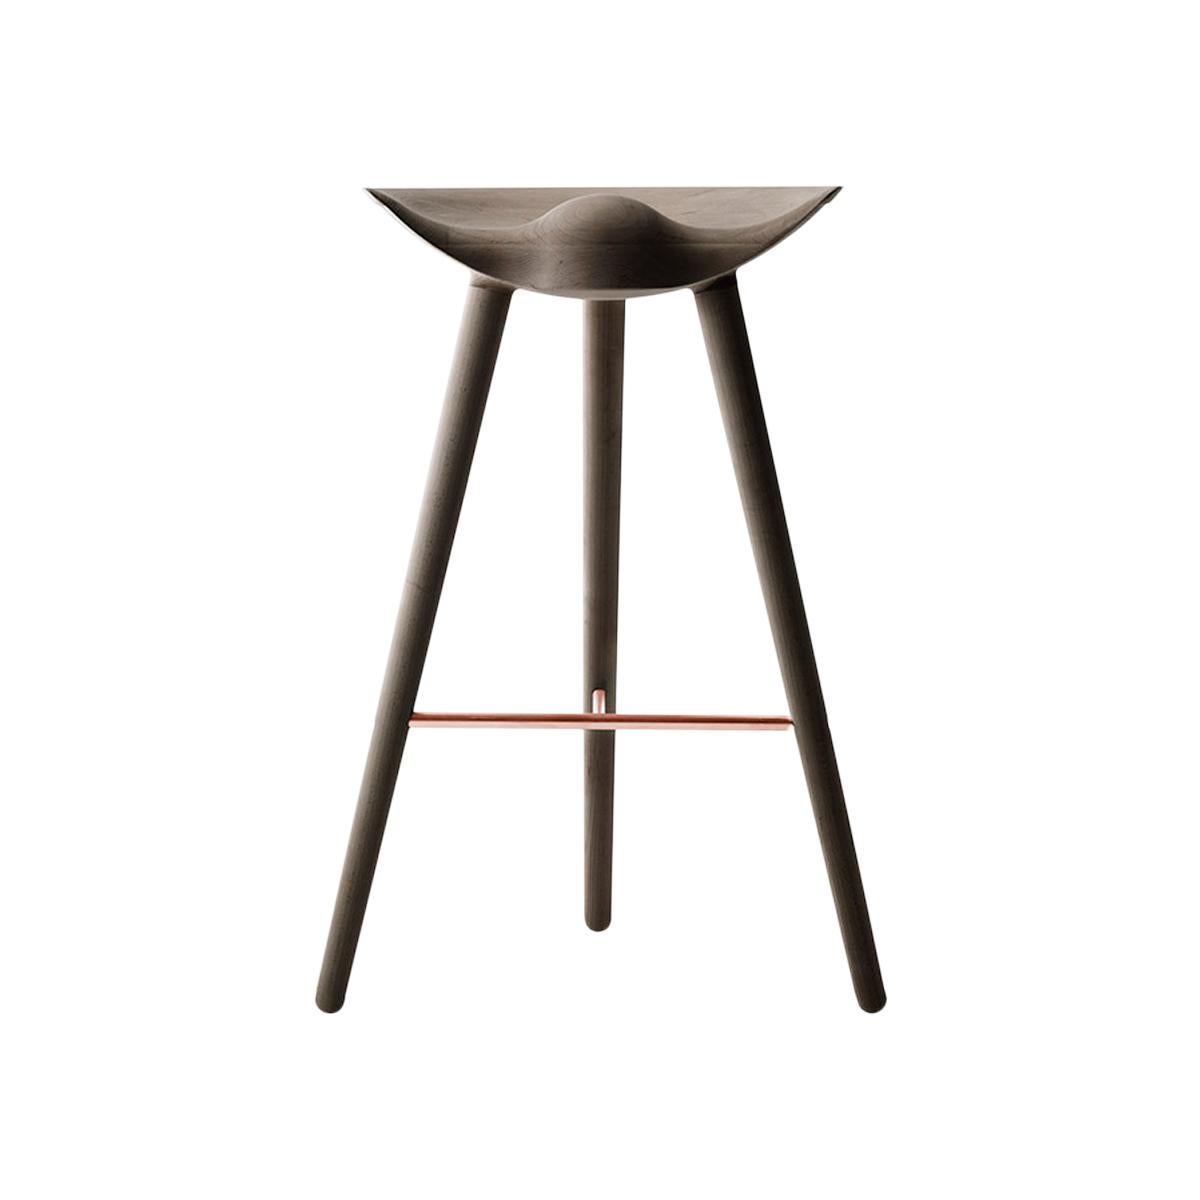 ML 42 Brown oak and copper bar stool by Lassen
Dimensions: H 77 x W 36 x L 55.5 cm
Materials: oak, brass

In 1942 Mogens Lassen designed the Stool ML42 as a piece for a furniture exhibition held at the Danish Museum of Decorative Art. He took